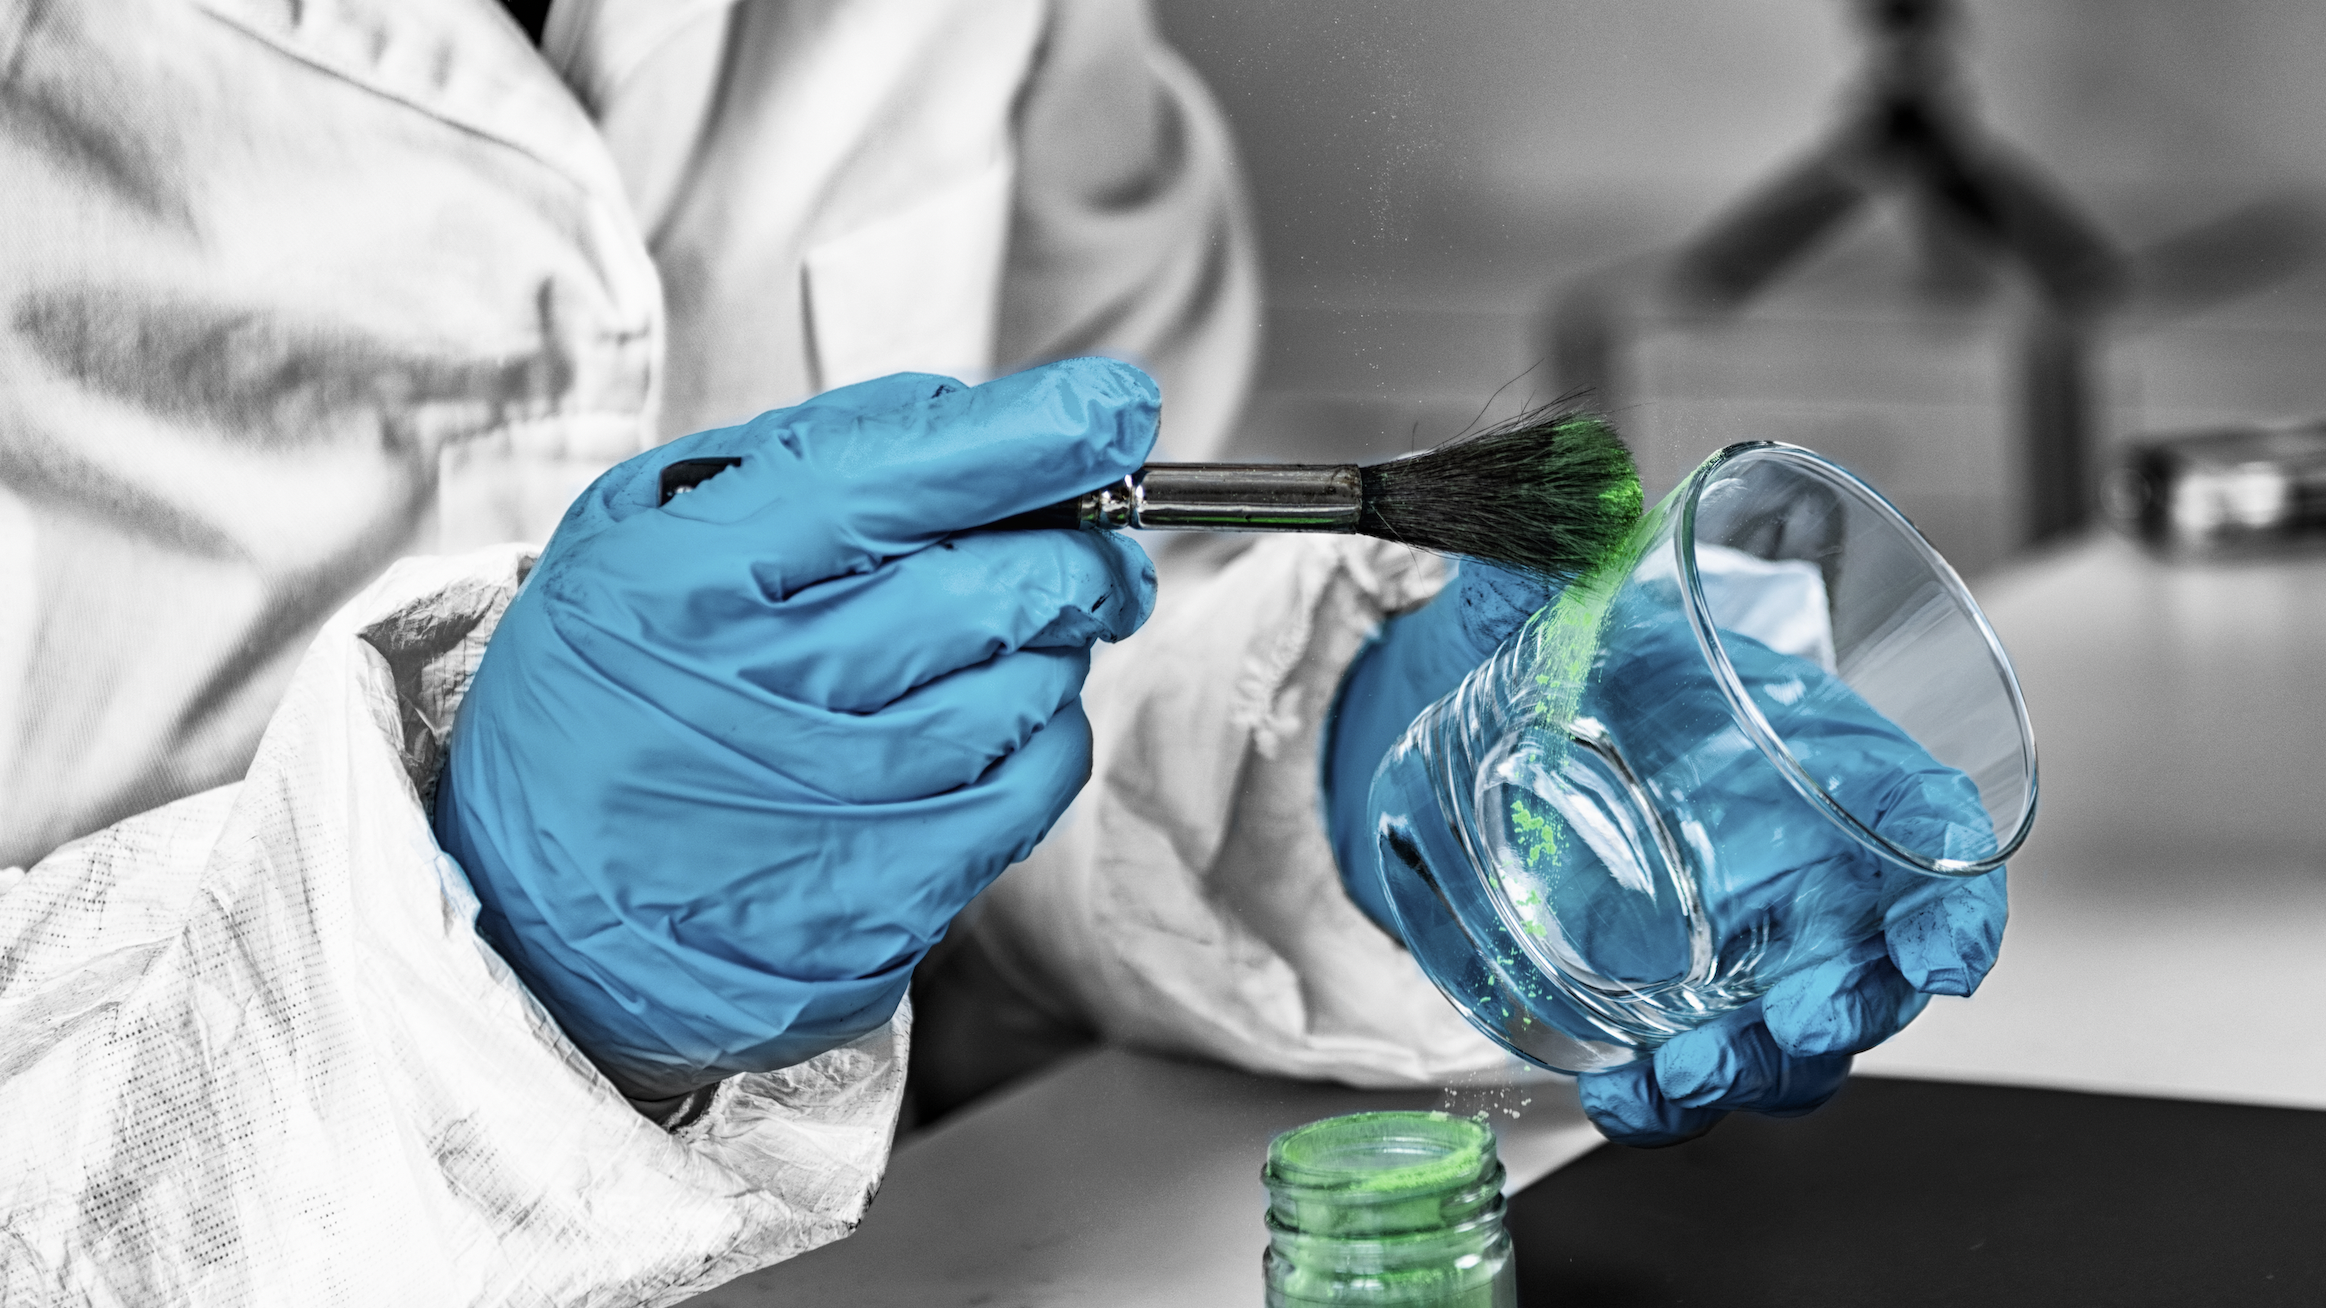 Image of Forensic Scientist Dusting for Prints